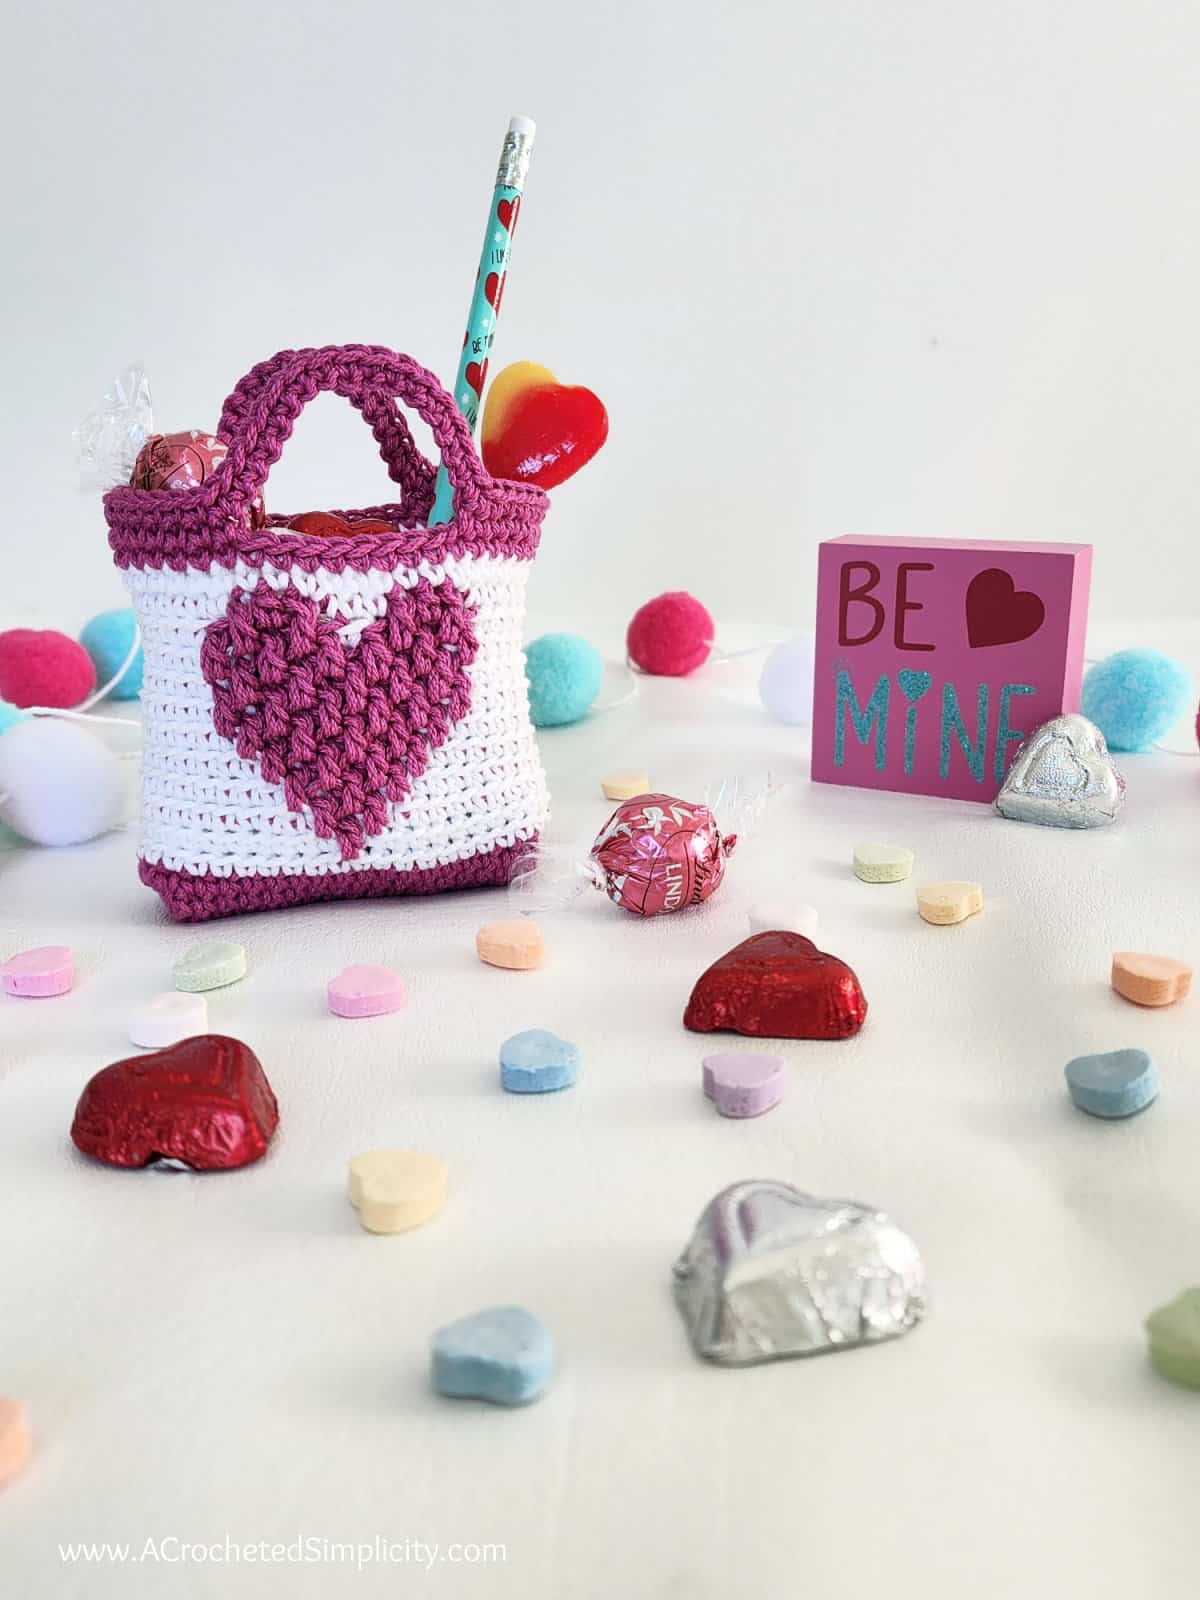 A small valentine treat bag in white and medium pink with candies scattered around it.